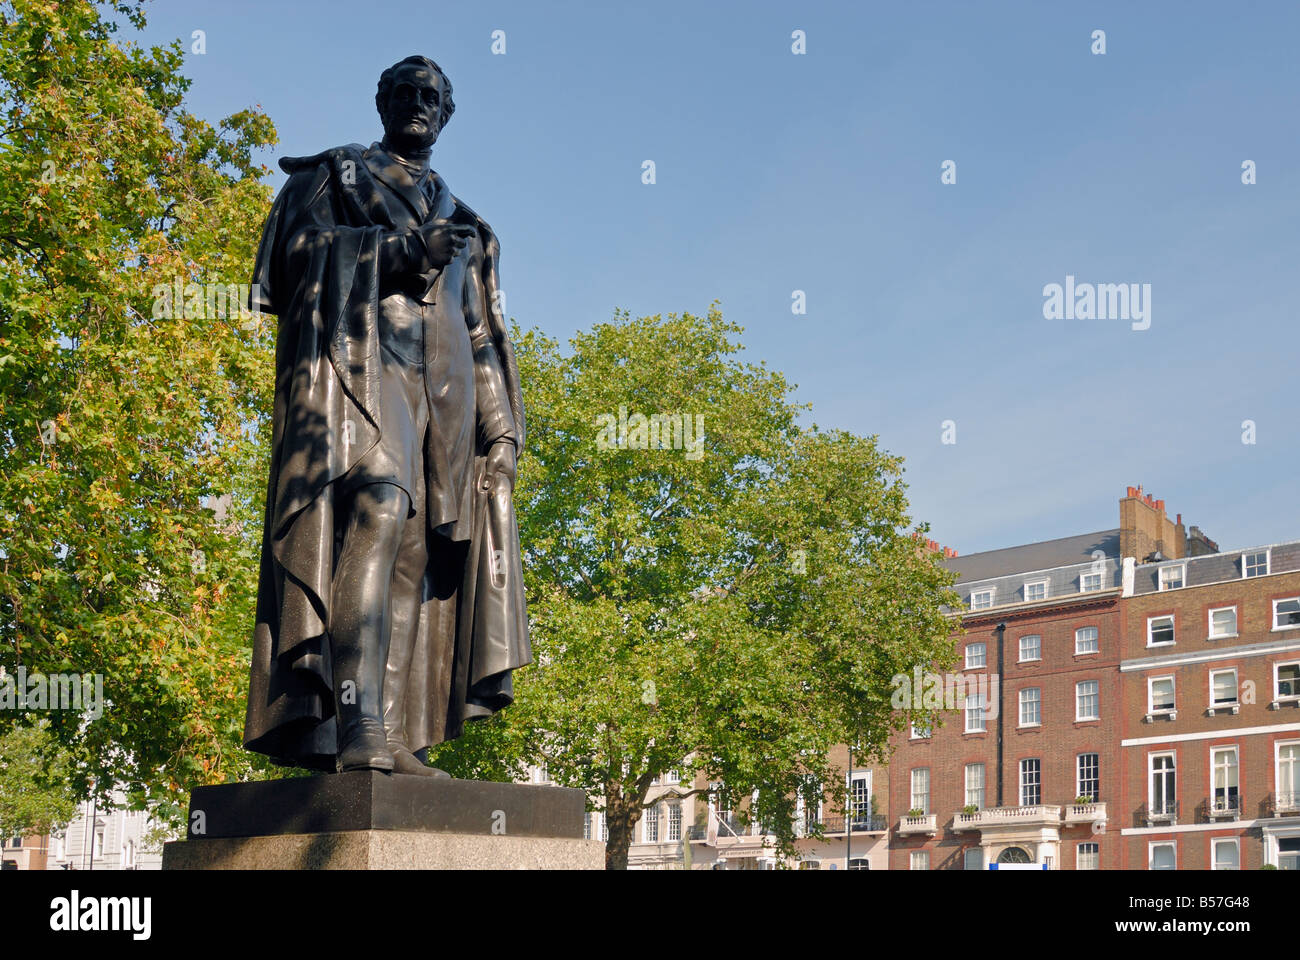 Cavendish Square with statue of Lord George Bentinck, London Stock Photo